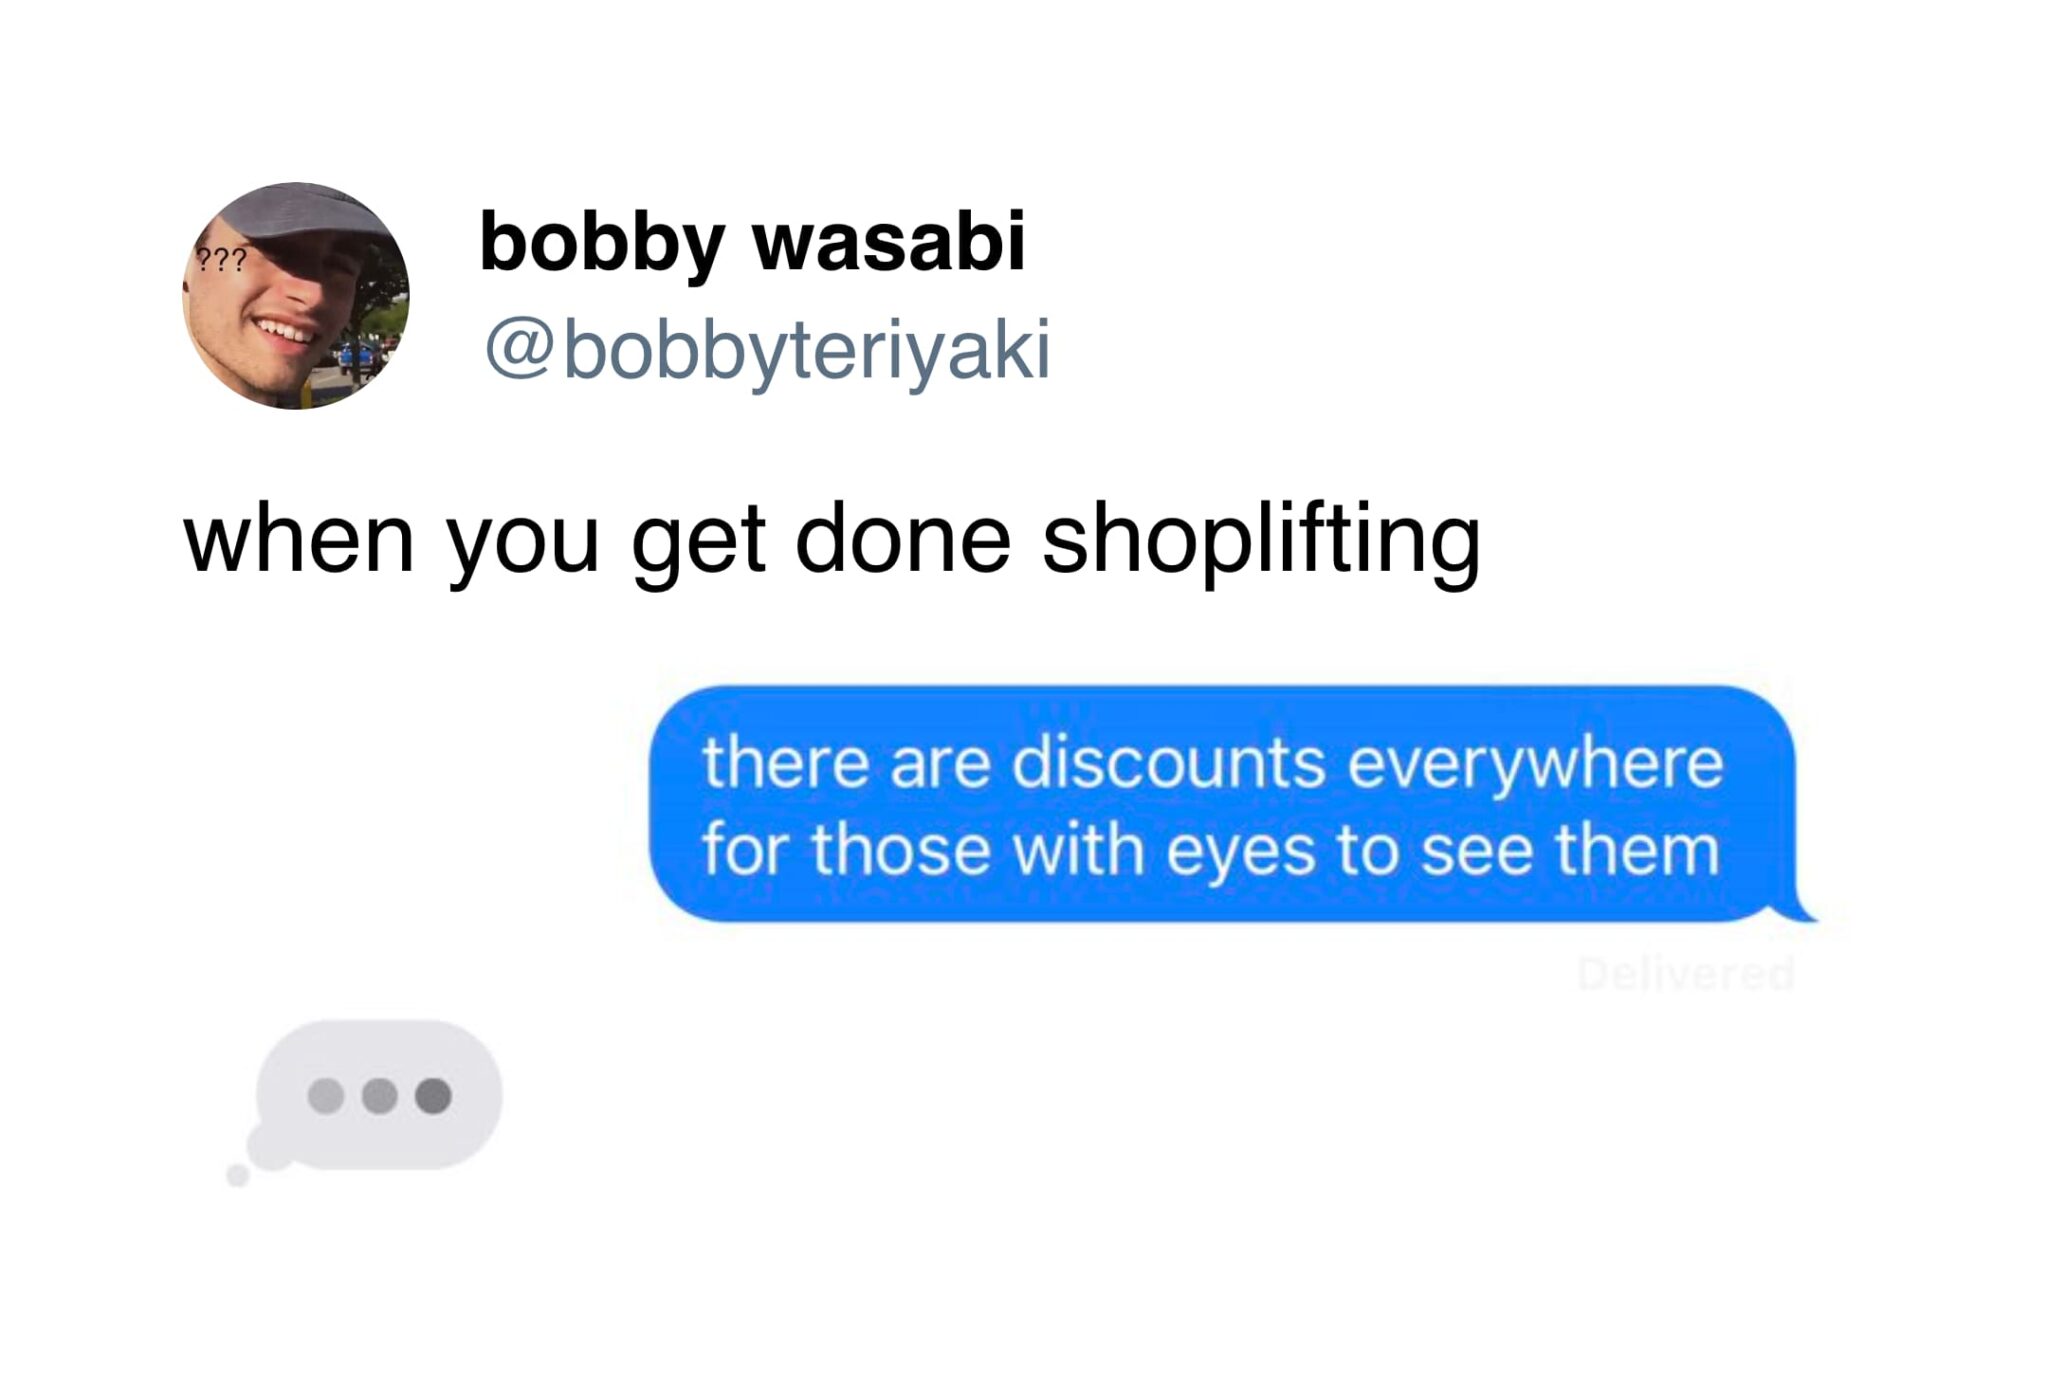 human behavior - bobby wasabi when you get done shoplifting ??? there are discounts everywhere for those with eyes to see them Delivered